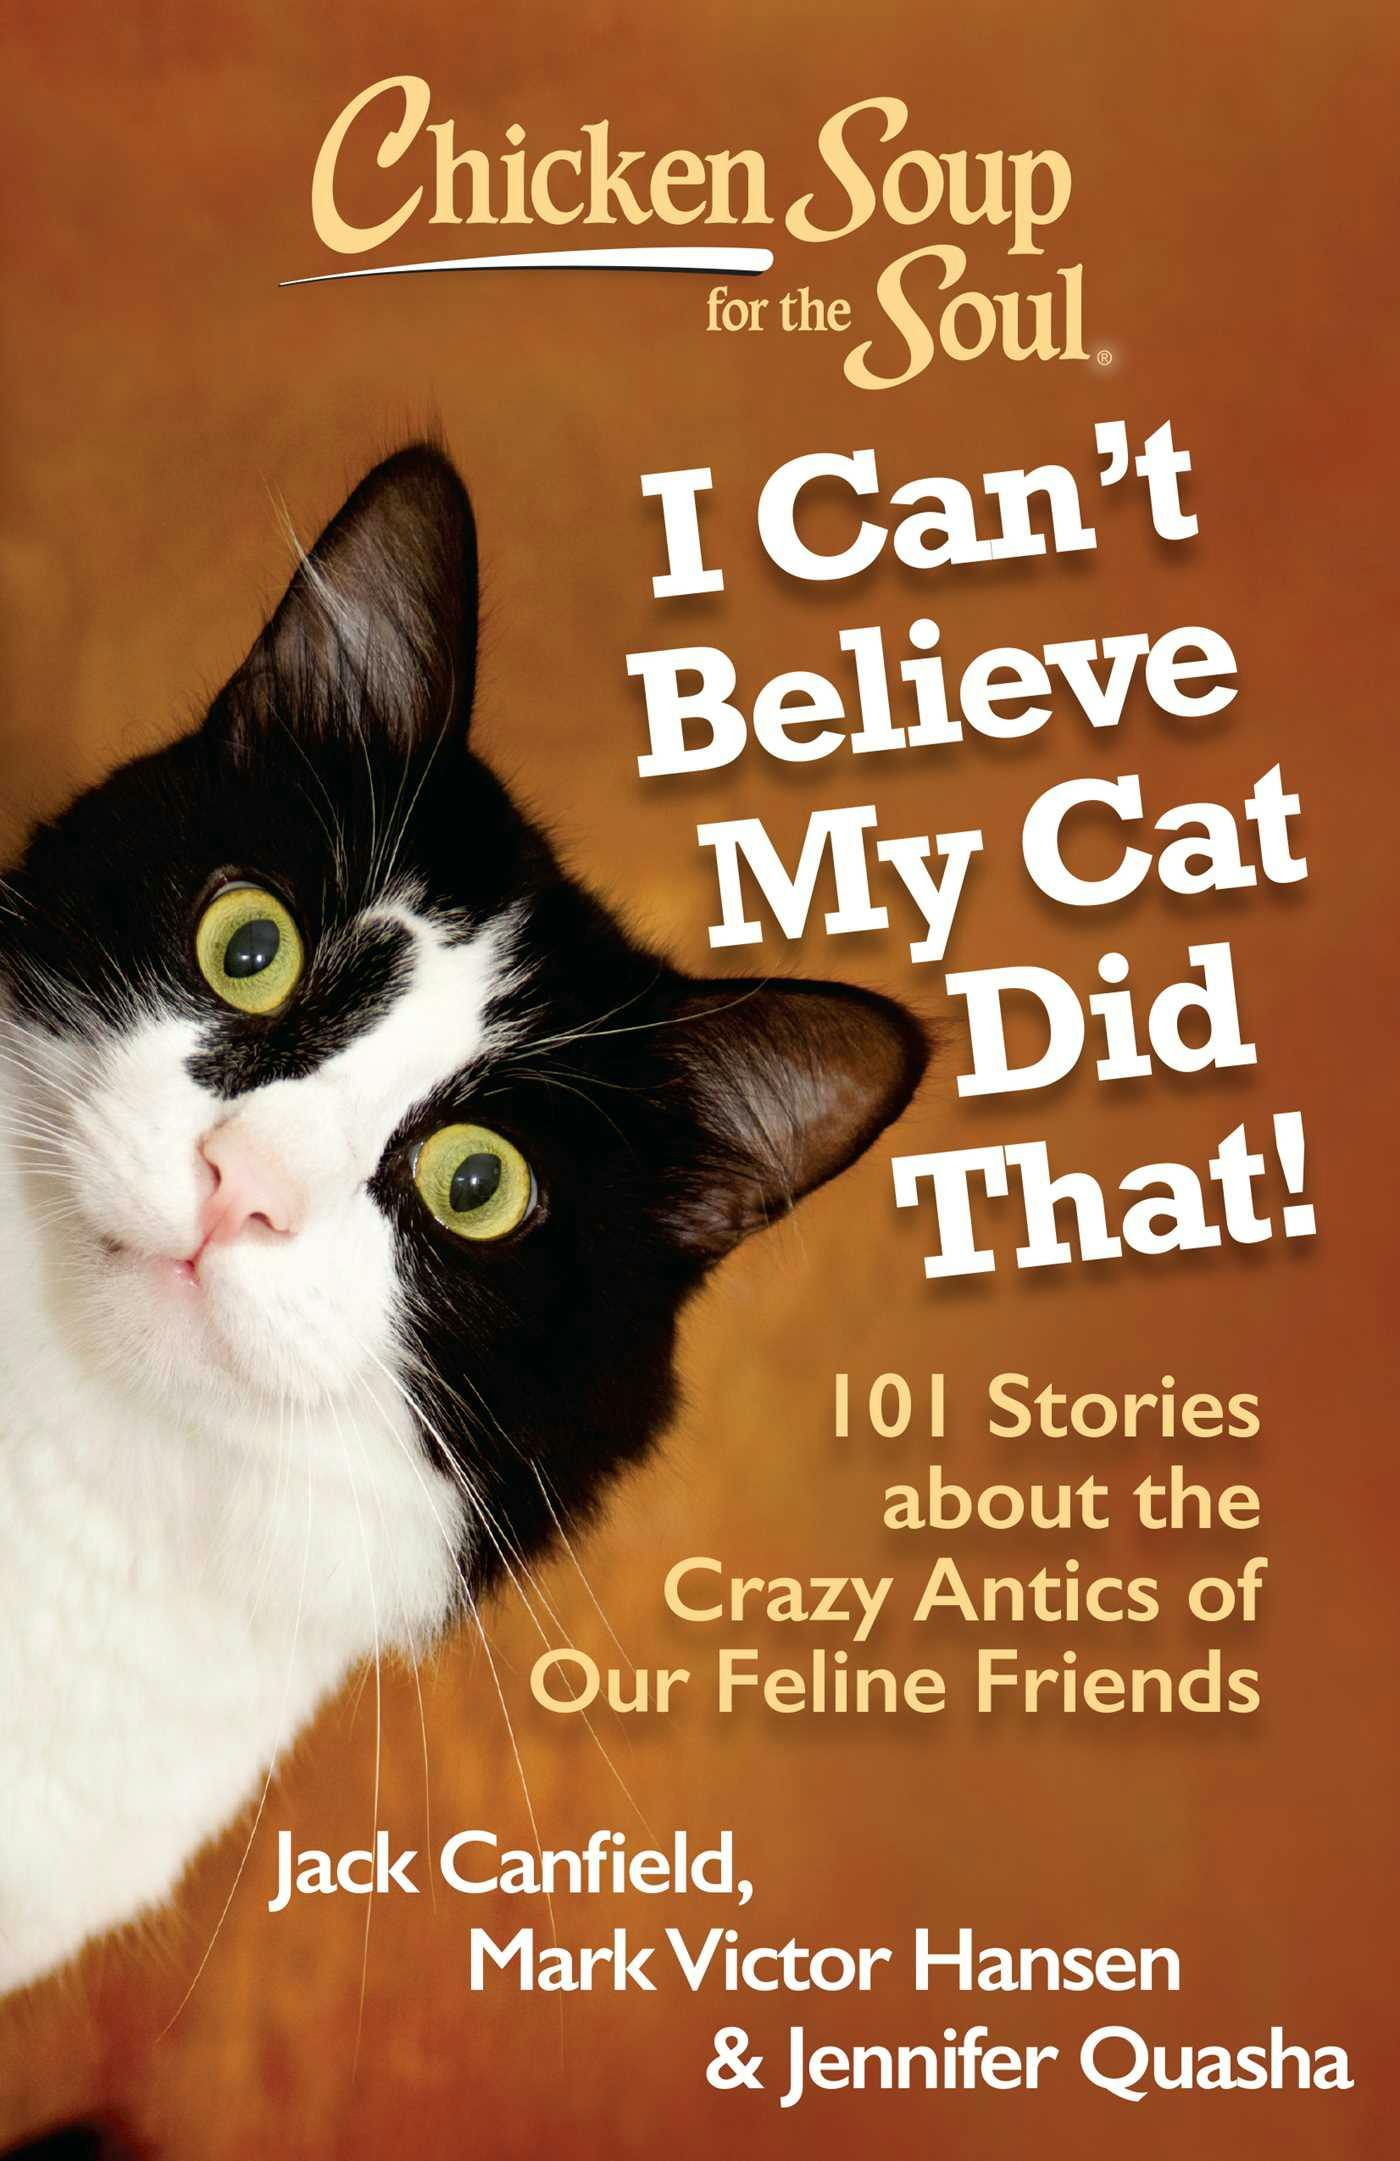 Chicken Soup for the Soul: I Can't Believe My Cat Did That!: 101 Stories about the Crazy Antics of Our Feline Friends - Mark Victor Hansen, Jack Canfield, Jennifer Quasha